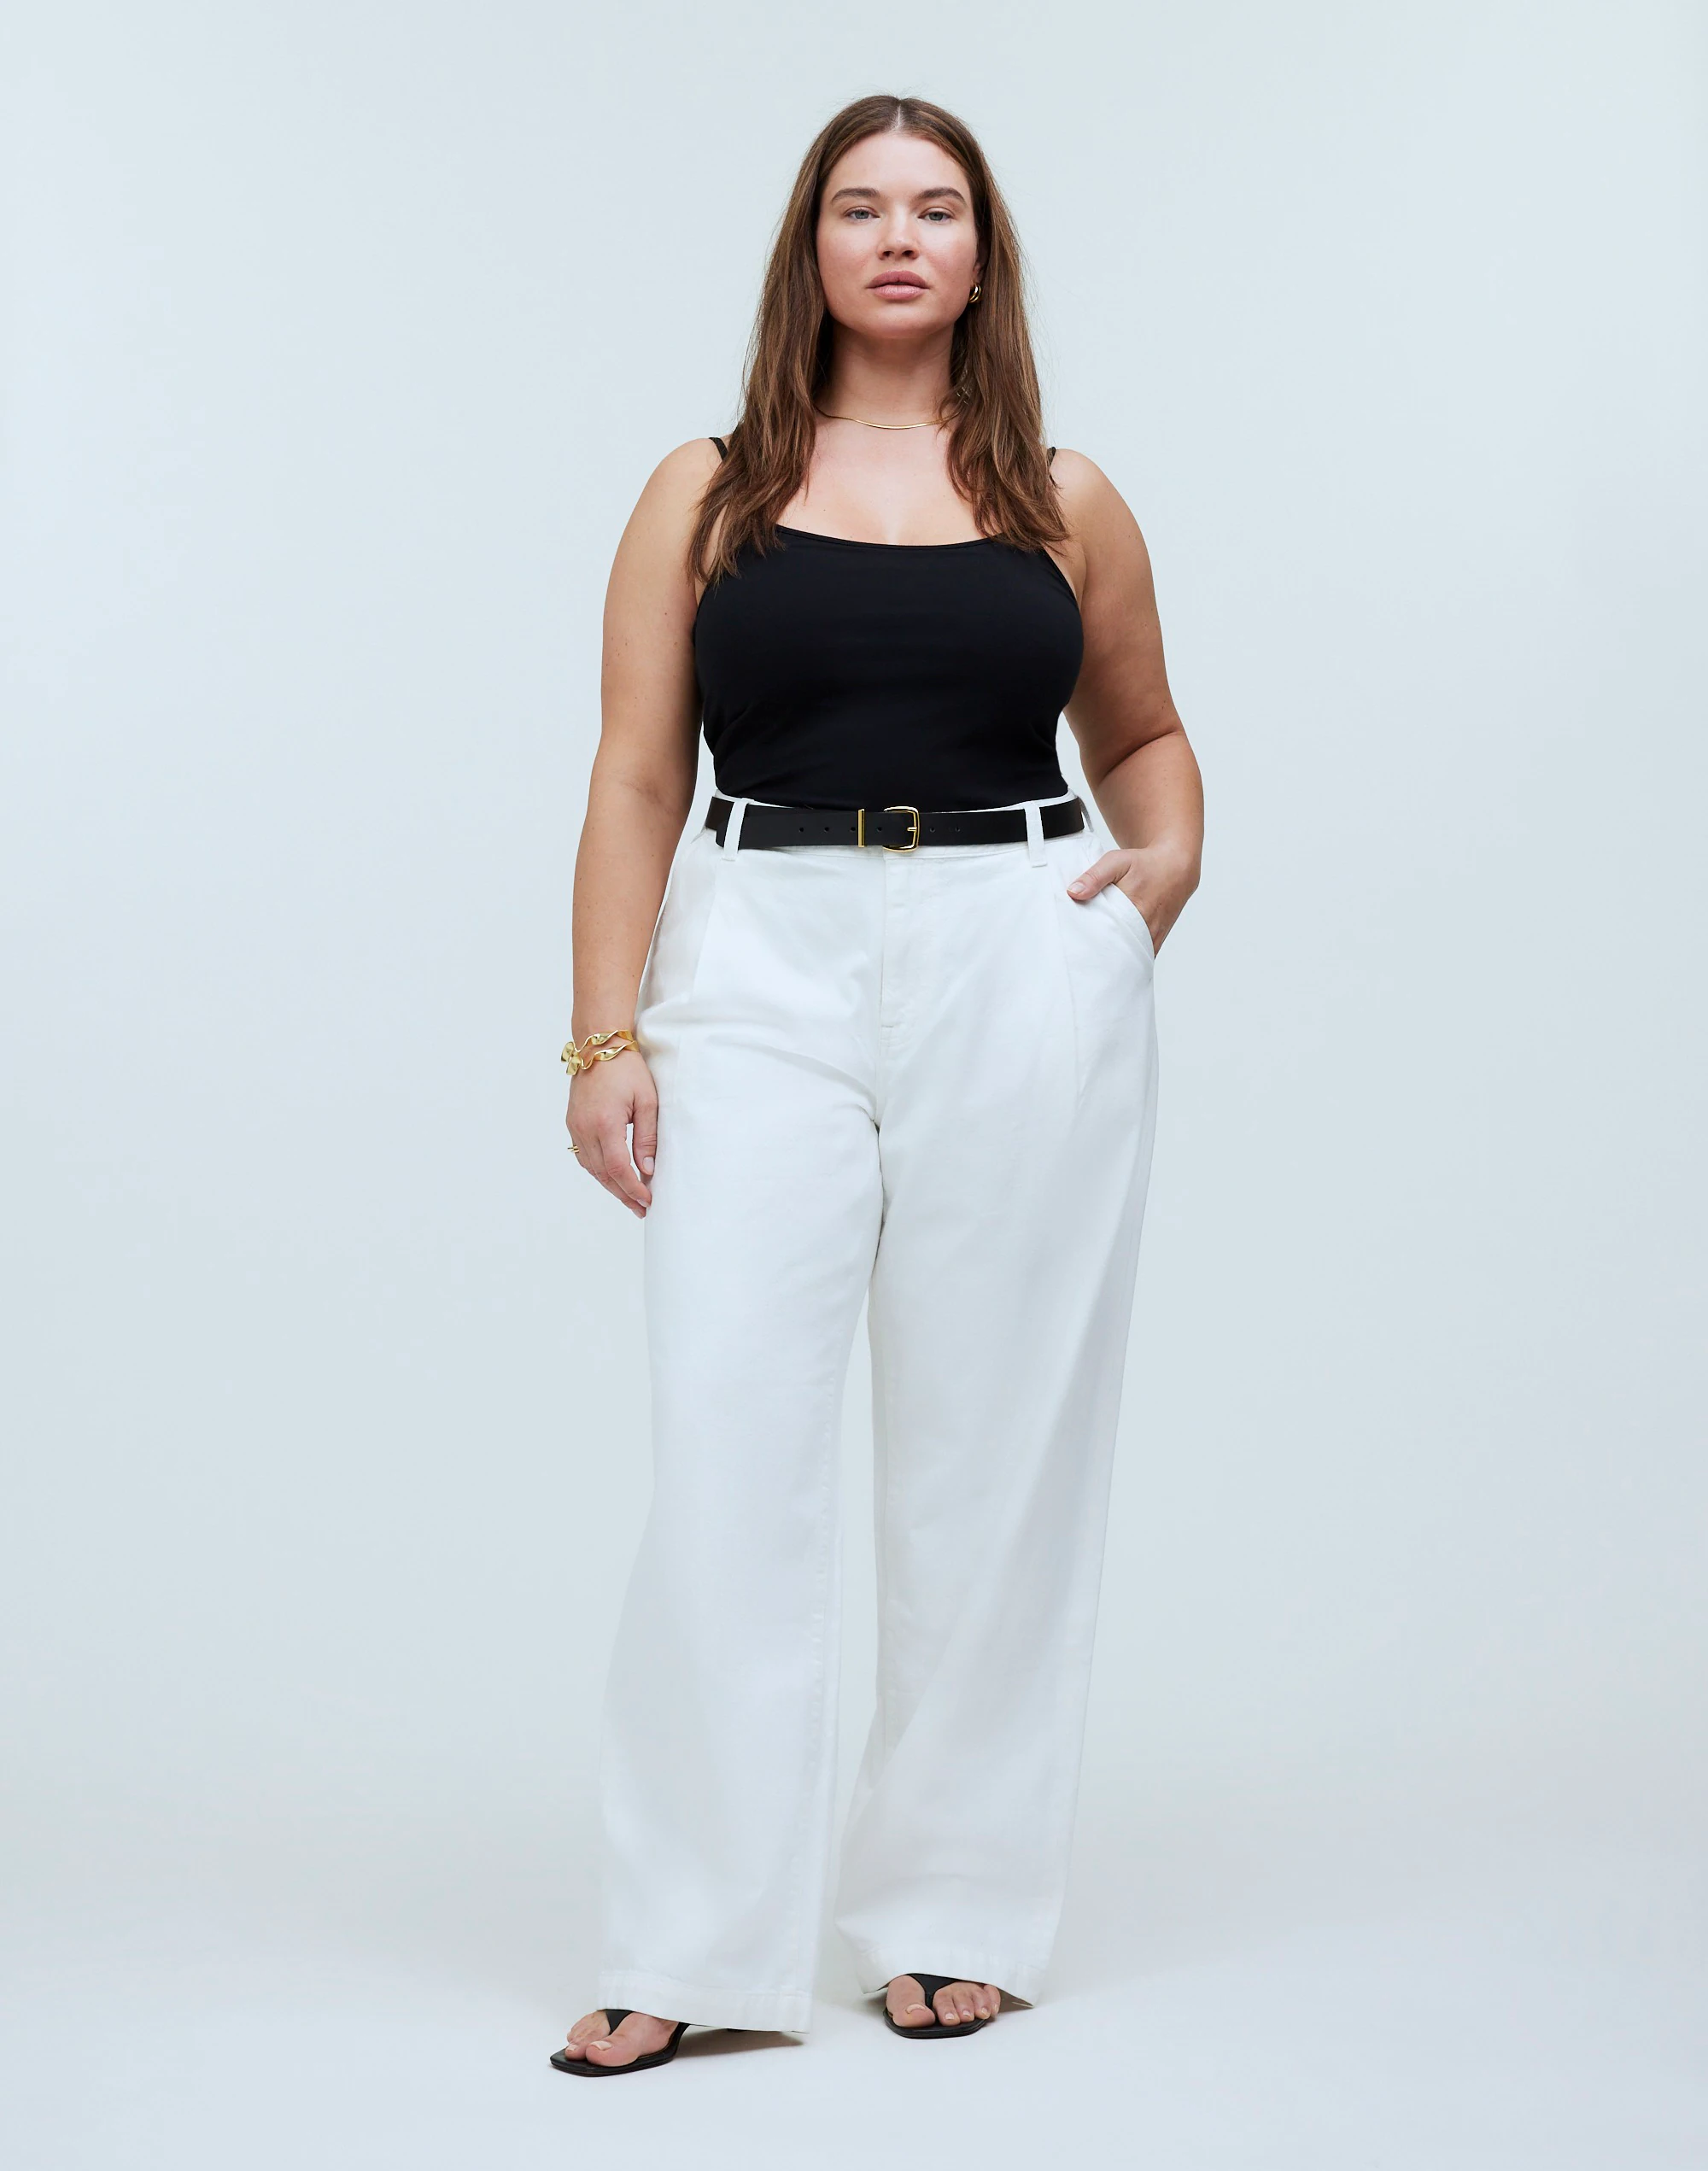 The Plus Harlow Wide-Leg Jean in Tile White: Airy Denim Edition